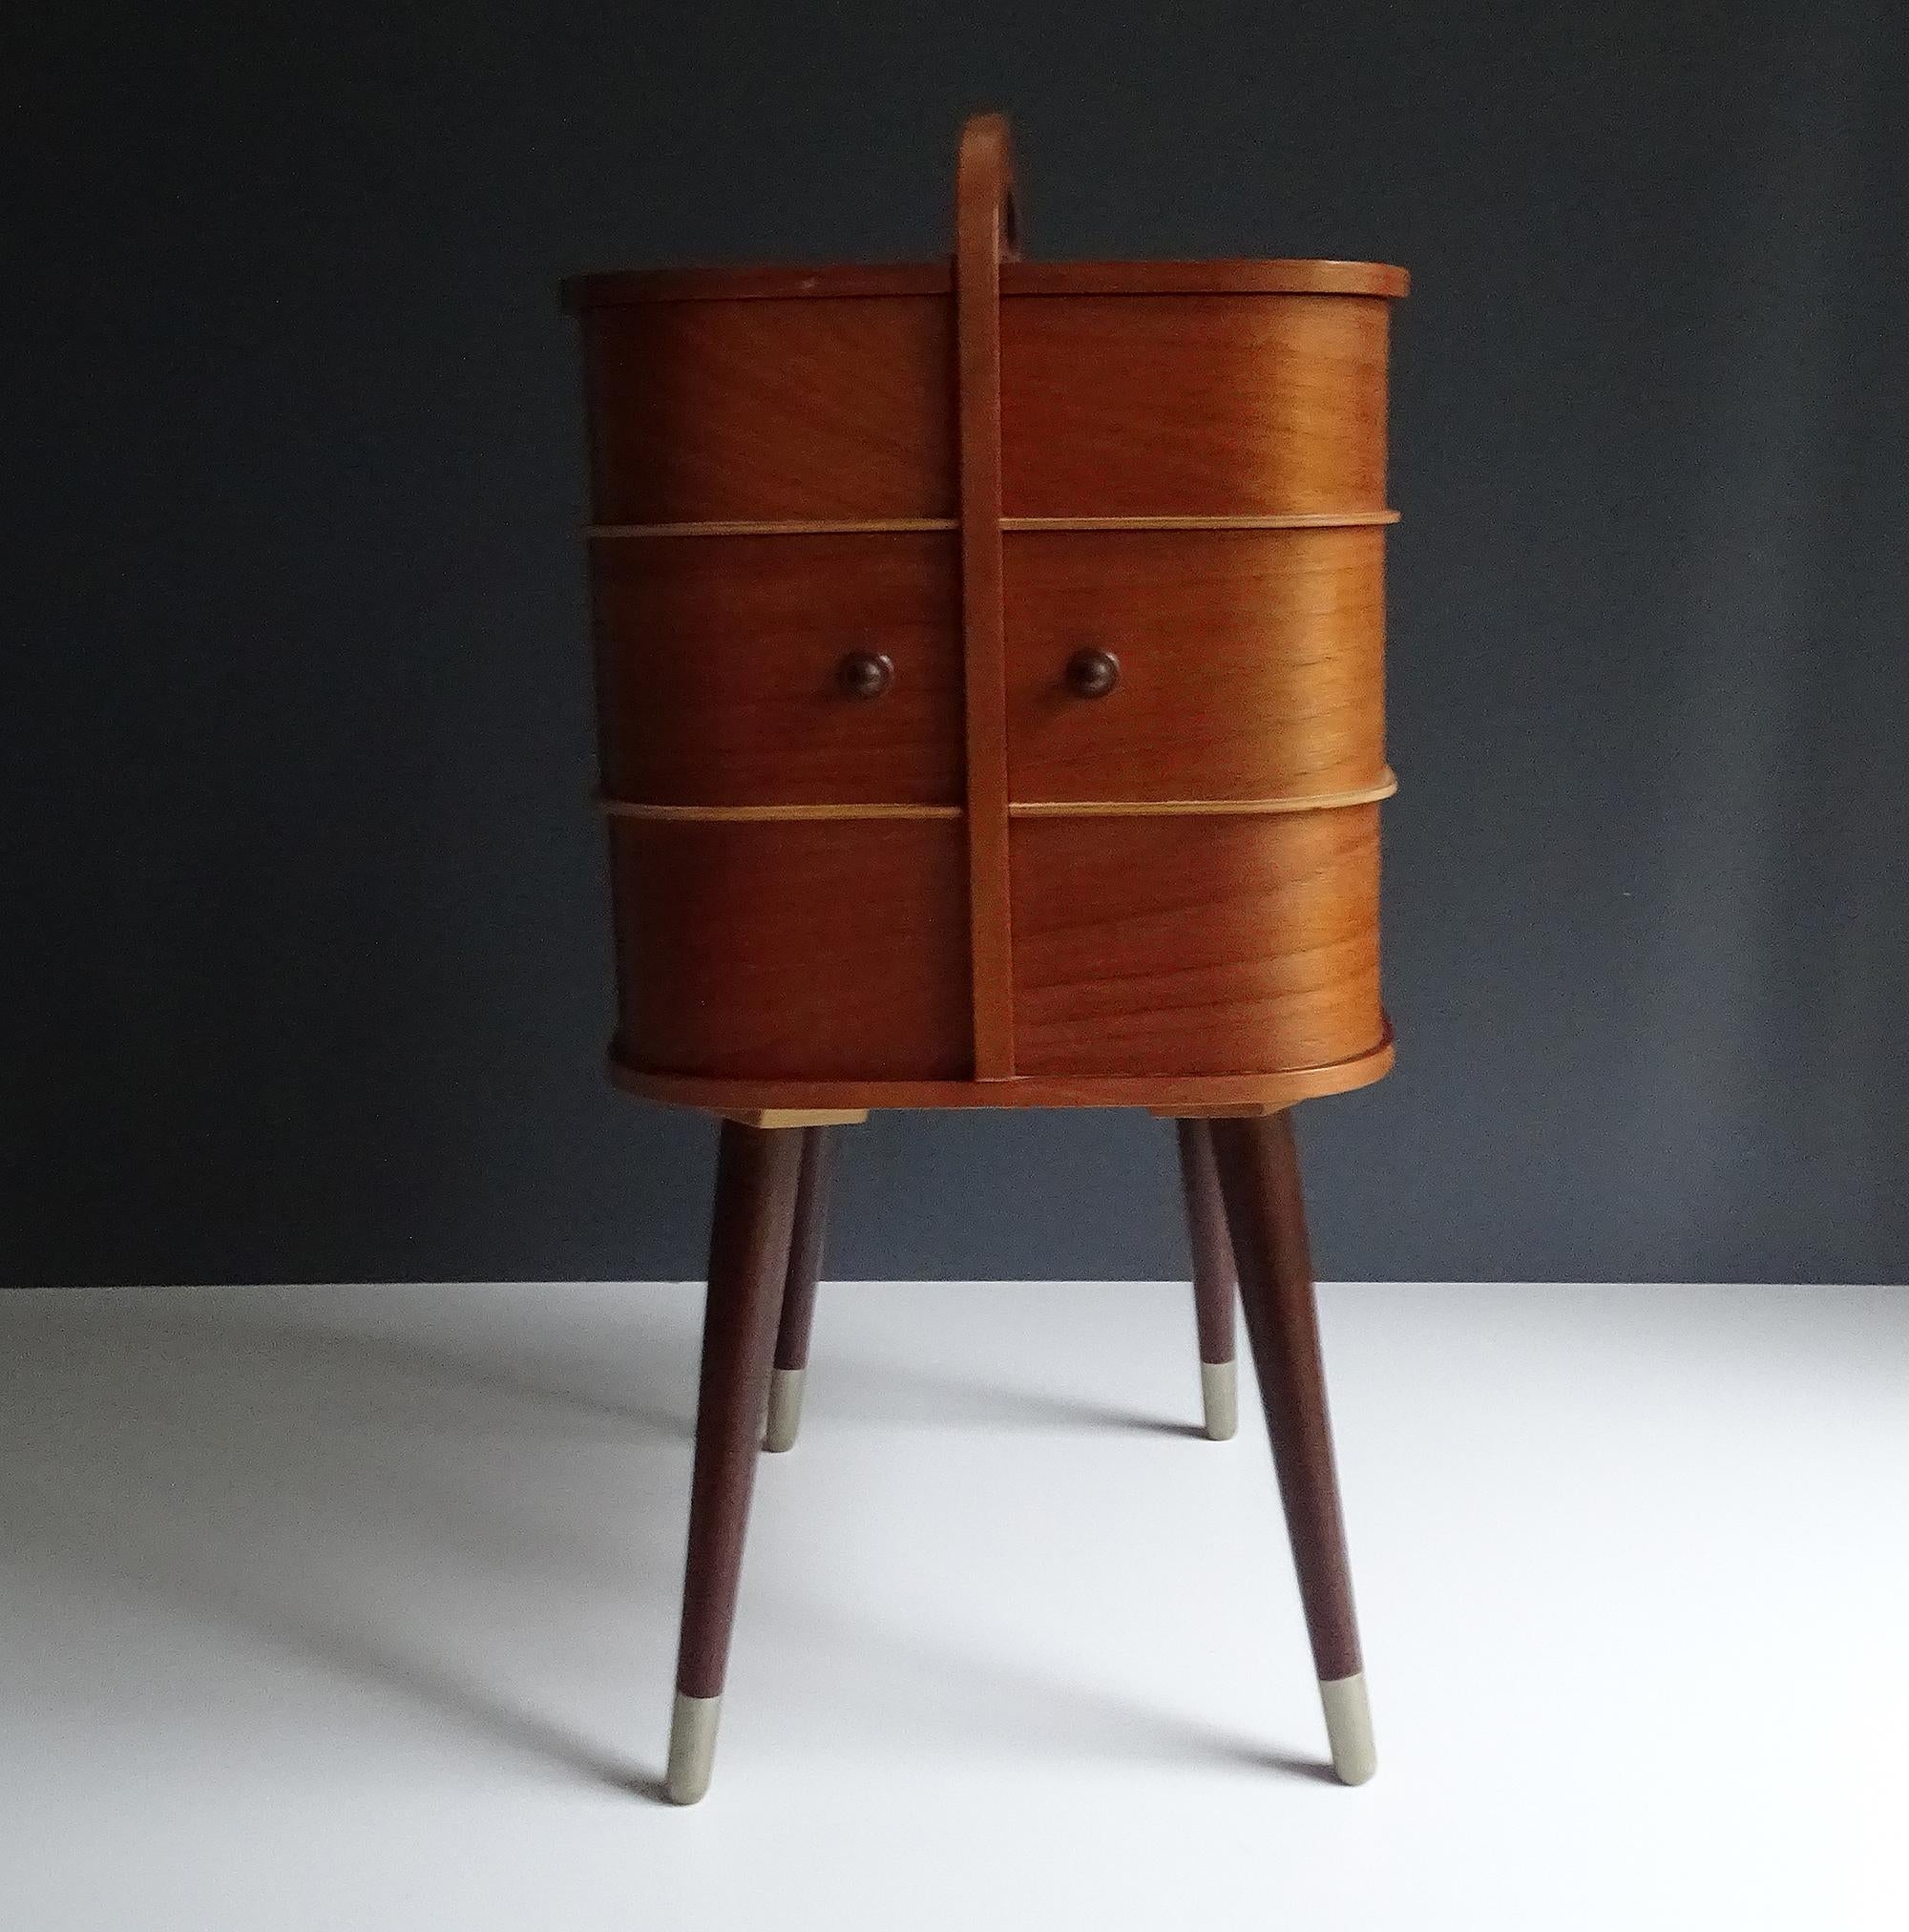 Stunning original Danish modern midcentury 1950s-1960s portable storage box with handle on top.
The box features 2 drawers which rotate sidewise revealing underneath 2 more compartments, the uppermost levels have also compartments under side hinged